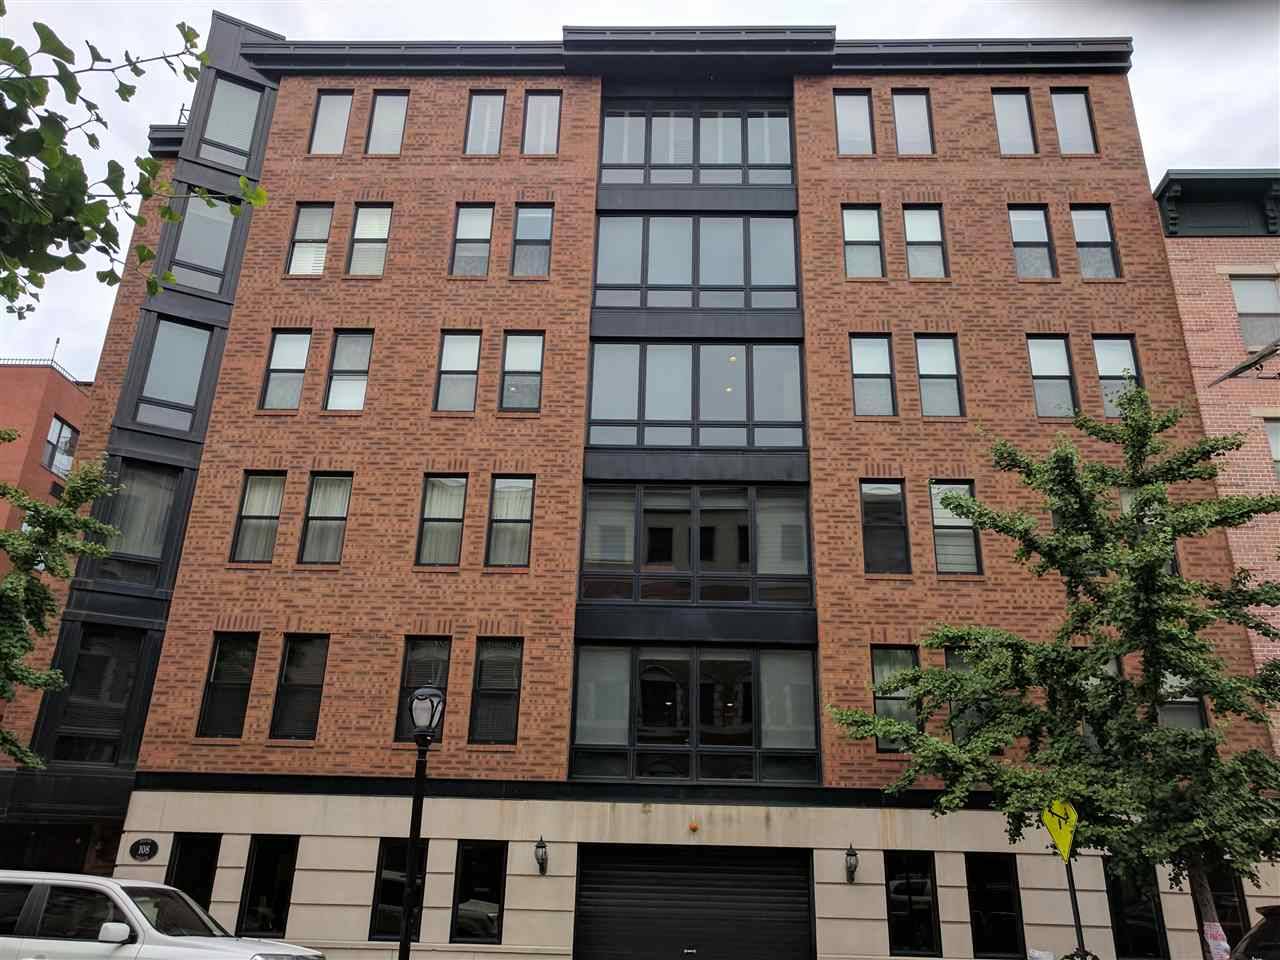 Come see this amazing condo rental in the heart of Hoboken